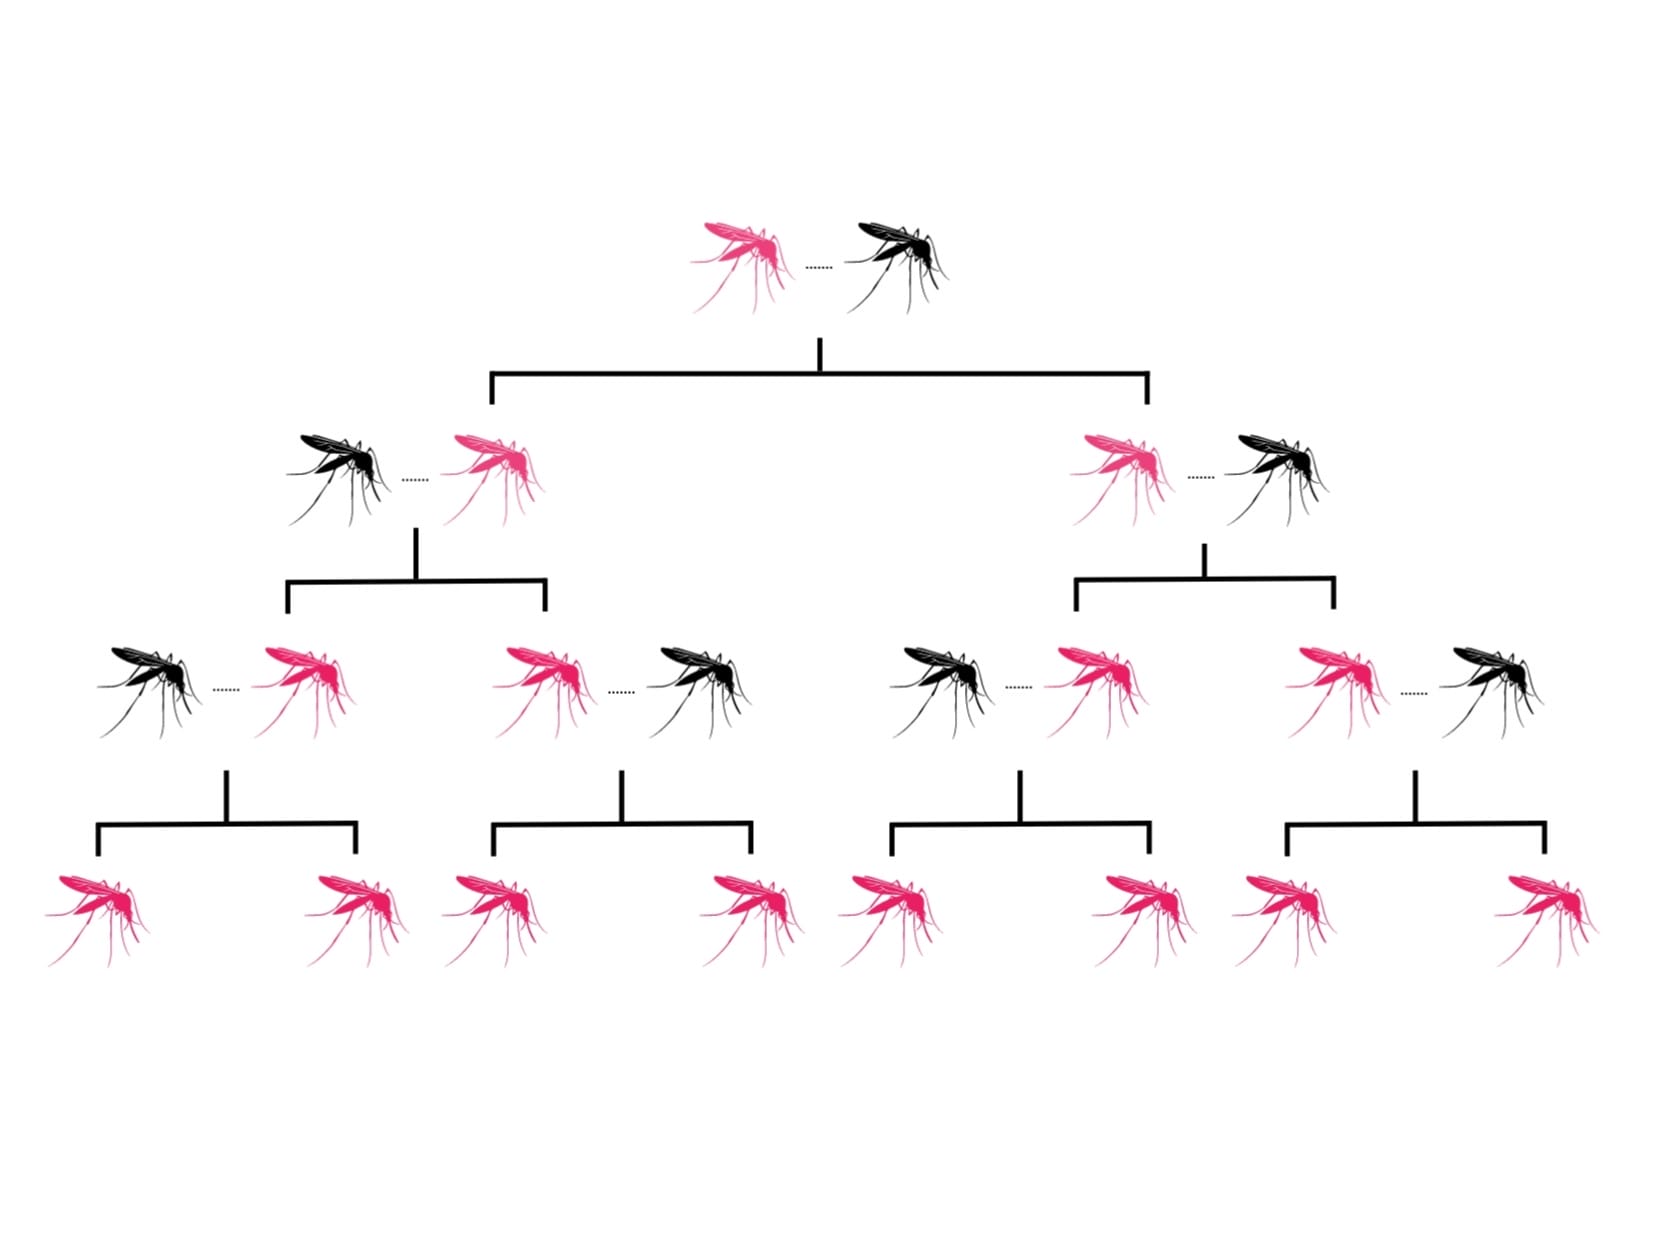 Diagram showing inheritance of artificial gene drives in genetically modified mosquitoes. 